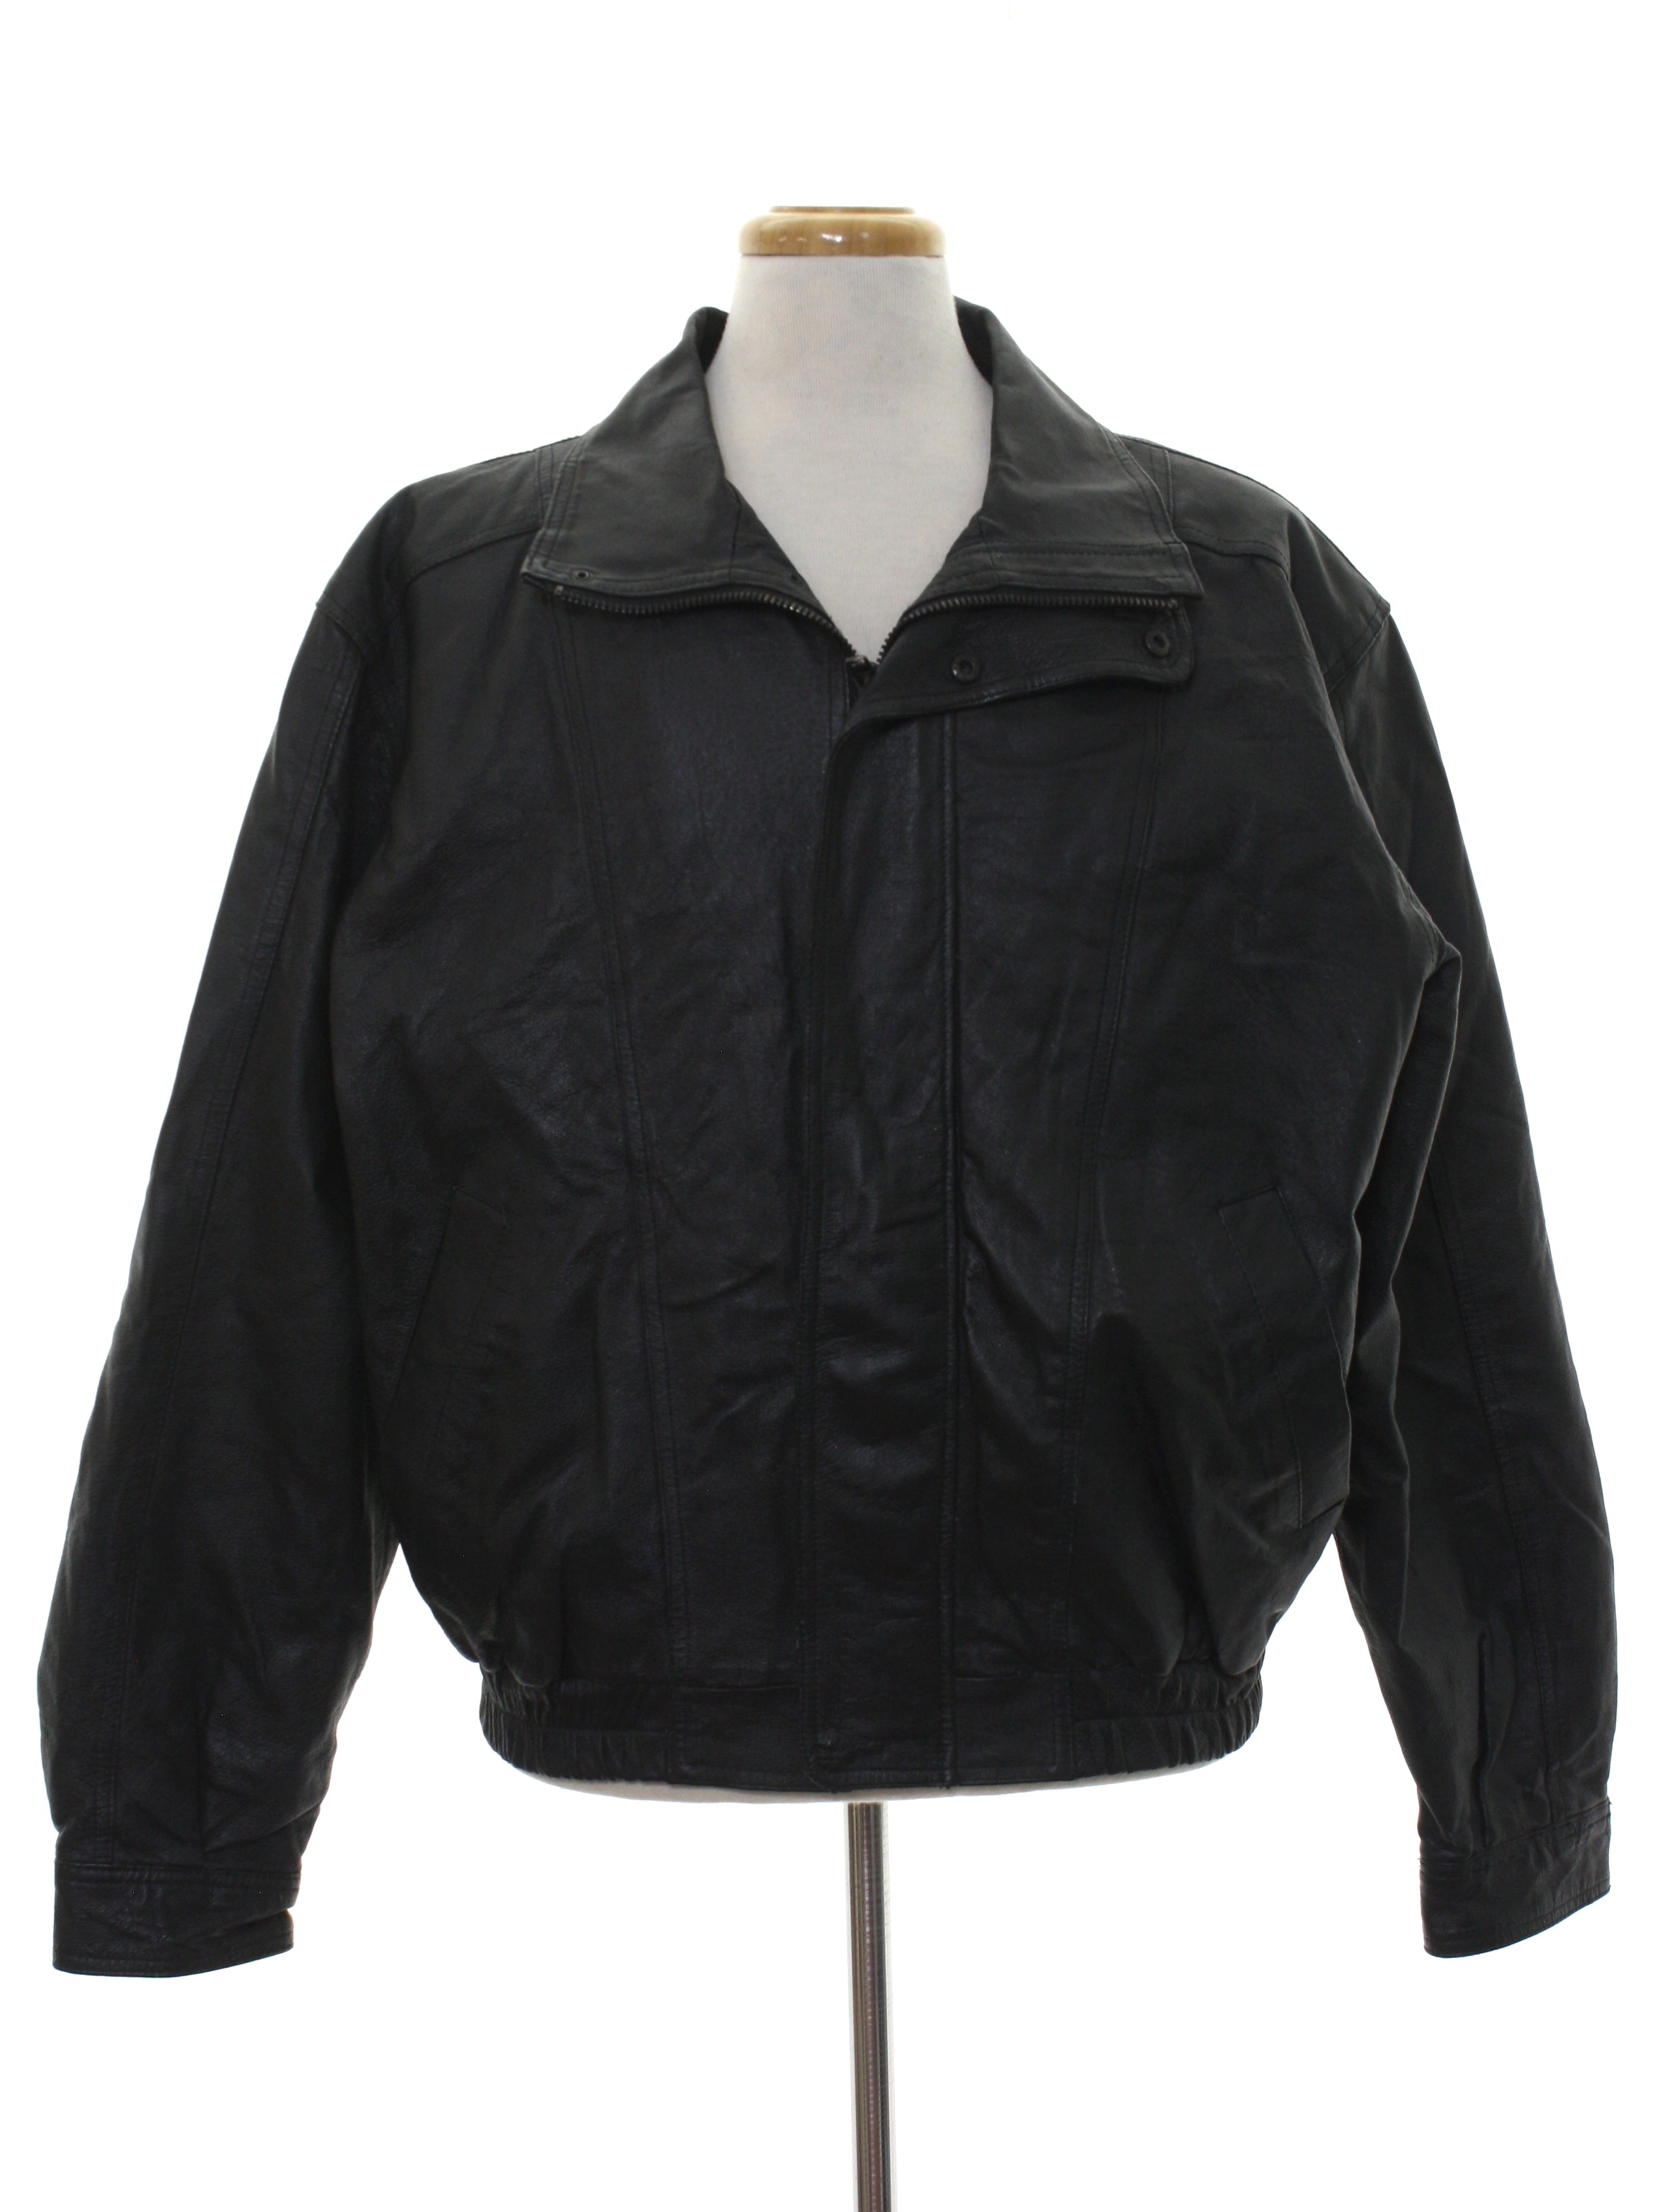 Retro 1980's Leather Jacket (Comint) : Late 80s -Comint- Mens black ...